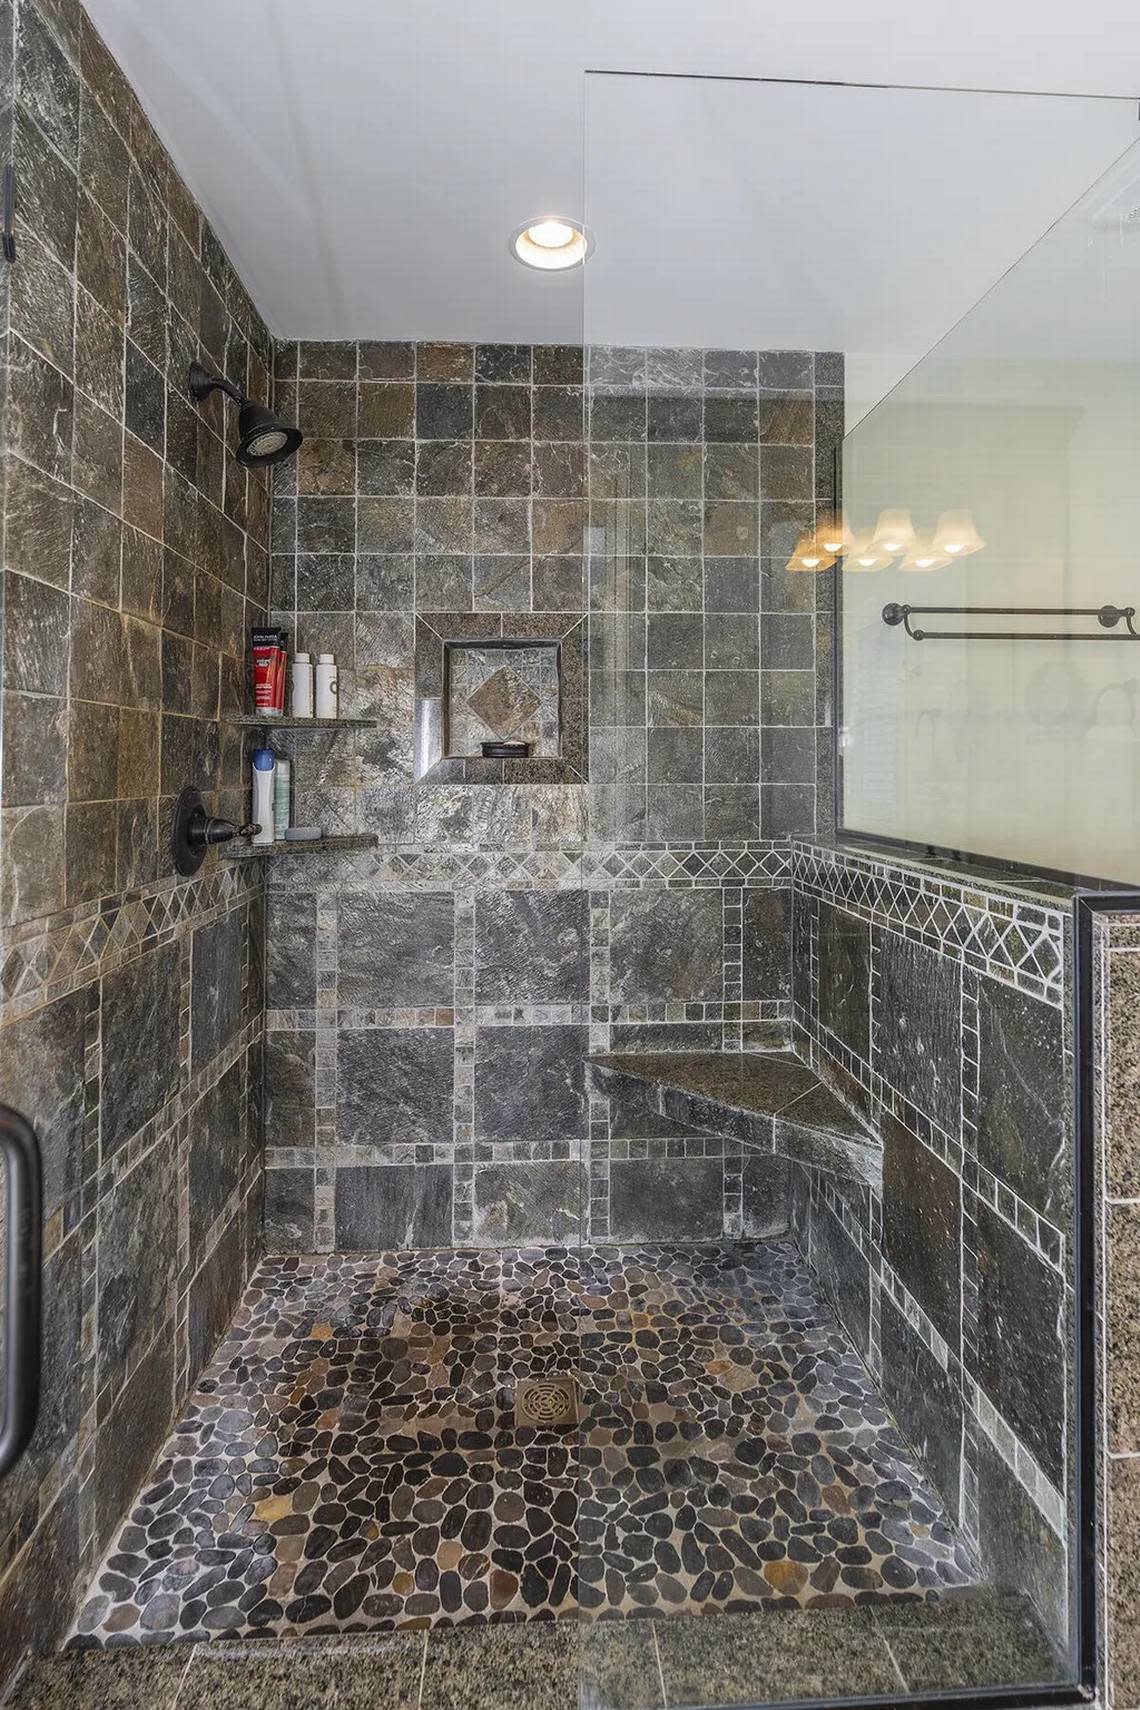 The shower in the primary bedroom’s bathroom at 403 Queensway Drive. Matt Huber/Team Pannell Real Estate